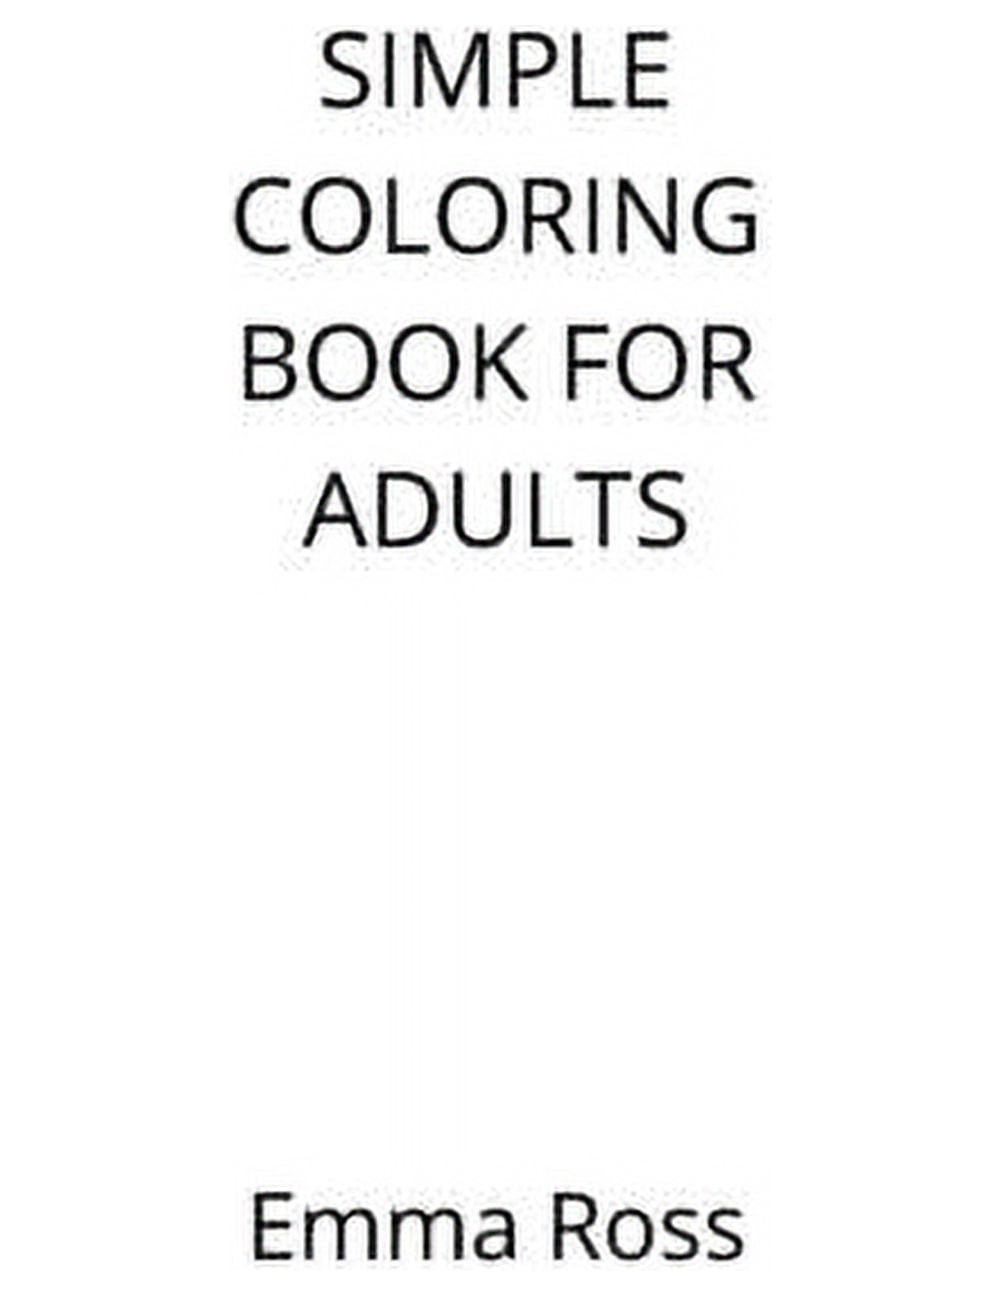 Simple Coloring Book for Adults: Gift for Senior Citizens With Larger  Designs That Are Easier to See and Easier to Color (Paperback)